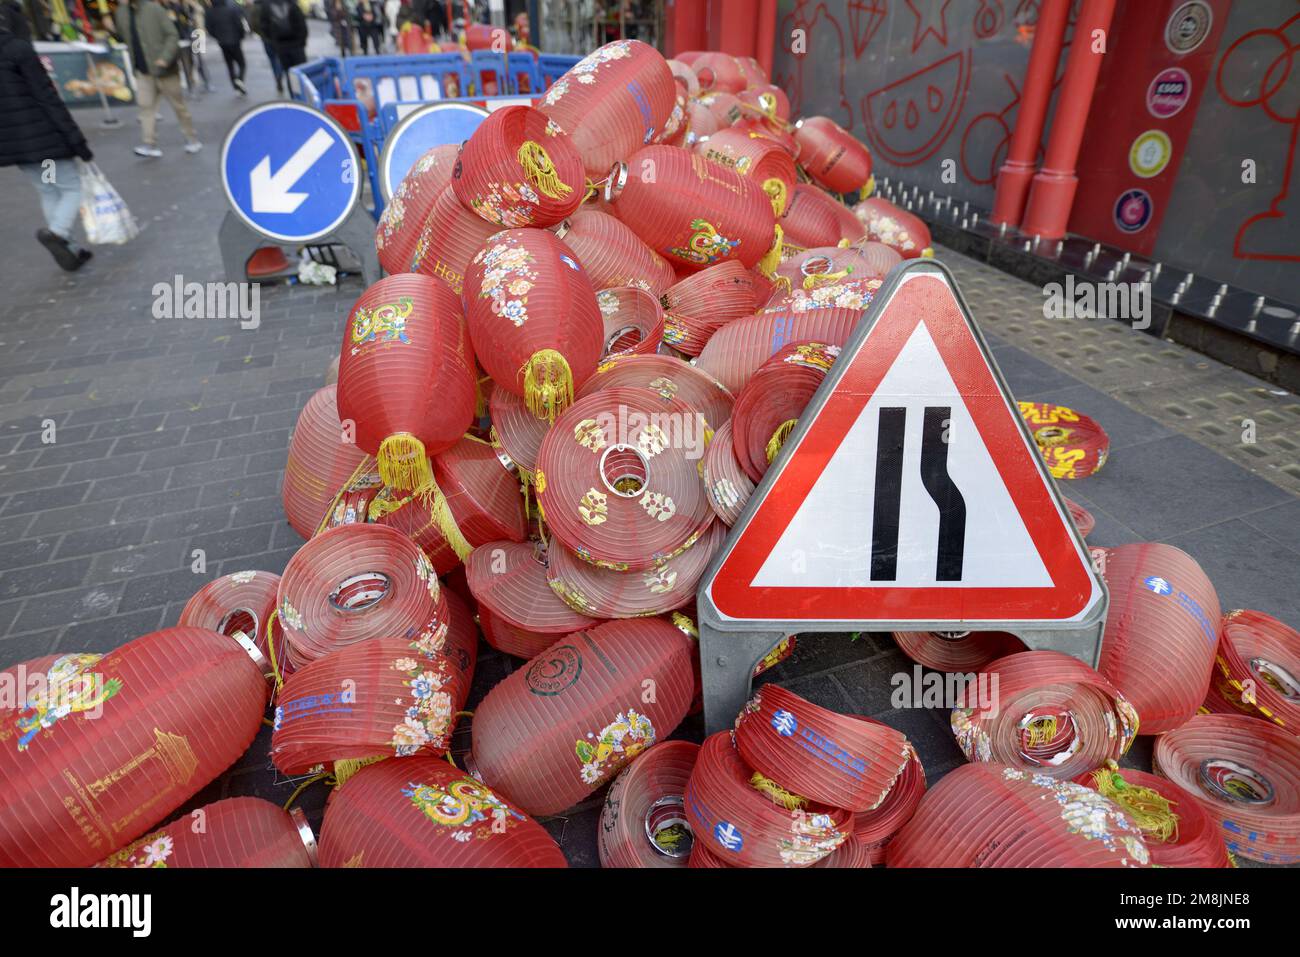 London, England, UK. Piles of Chinese lanterns in Chinatown as old ones are replaced with new during preparations for the Chinese New Year, Jan 2023 Stock Photo